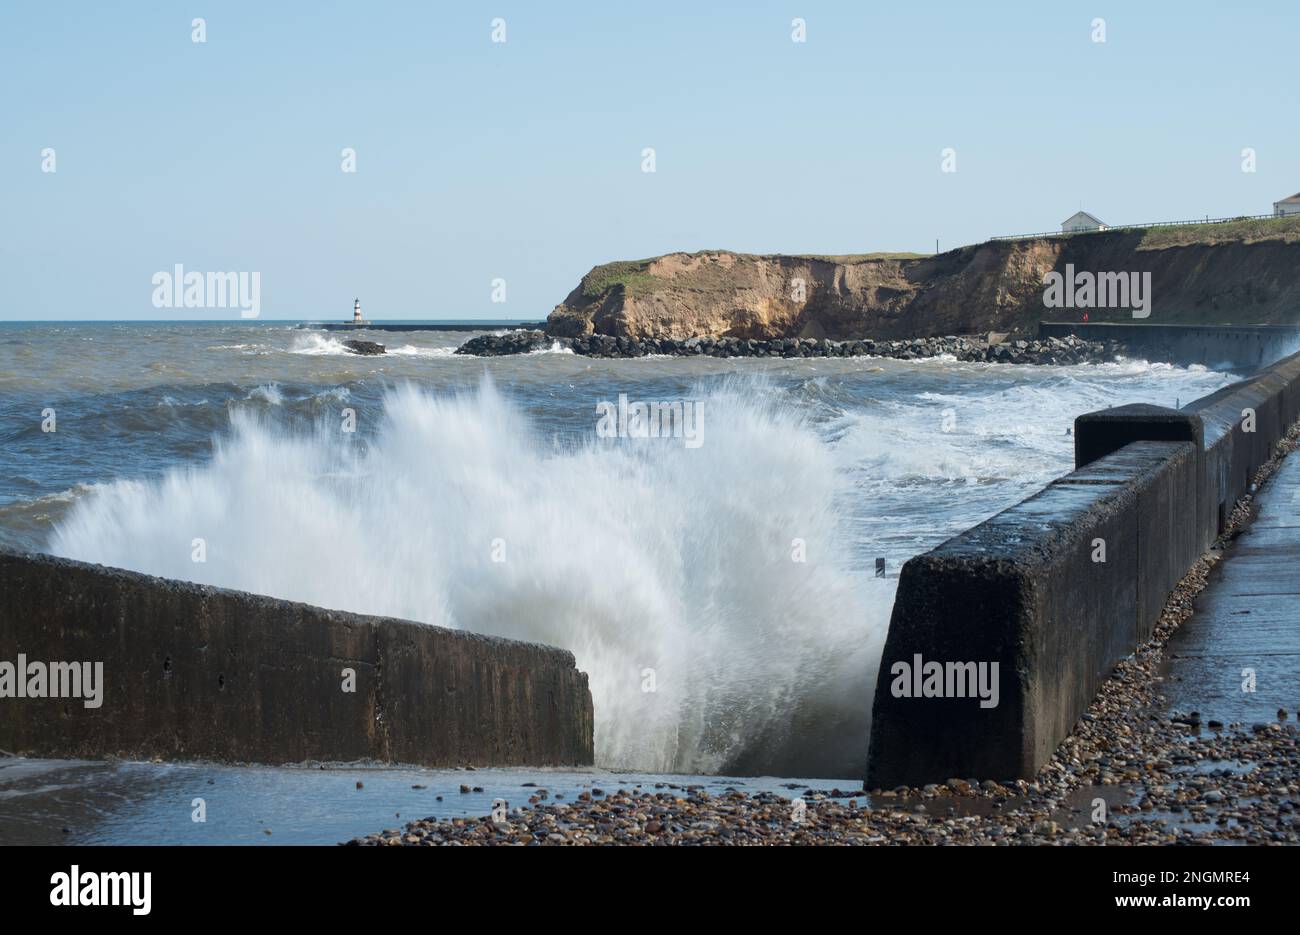 View along the promenade at Seaham including cliffs and distant lighthouse with waves crashing into the stonework throwing up plumes of spray Stock Photo